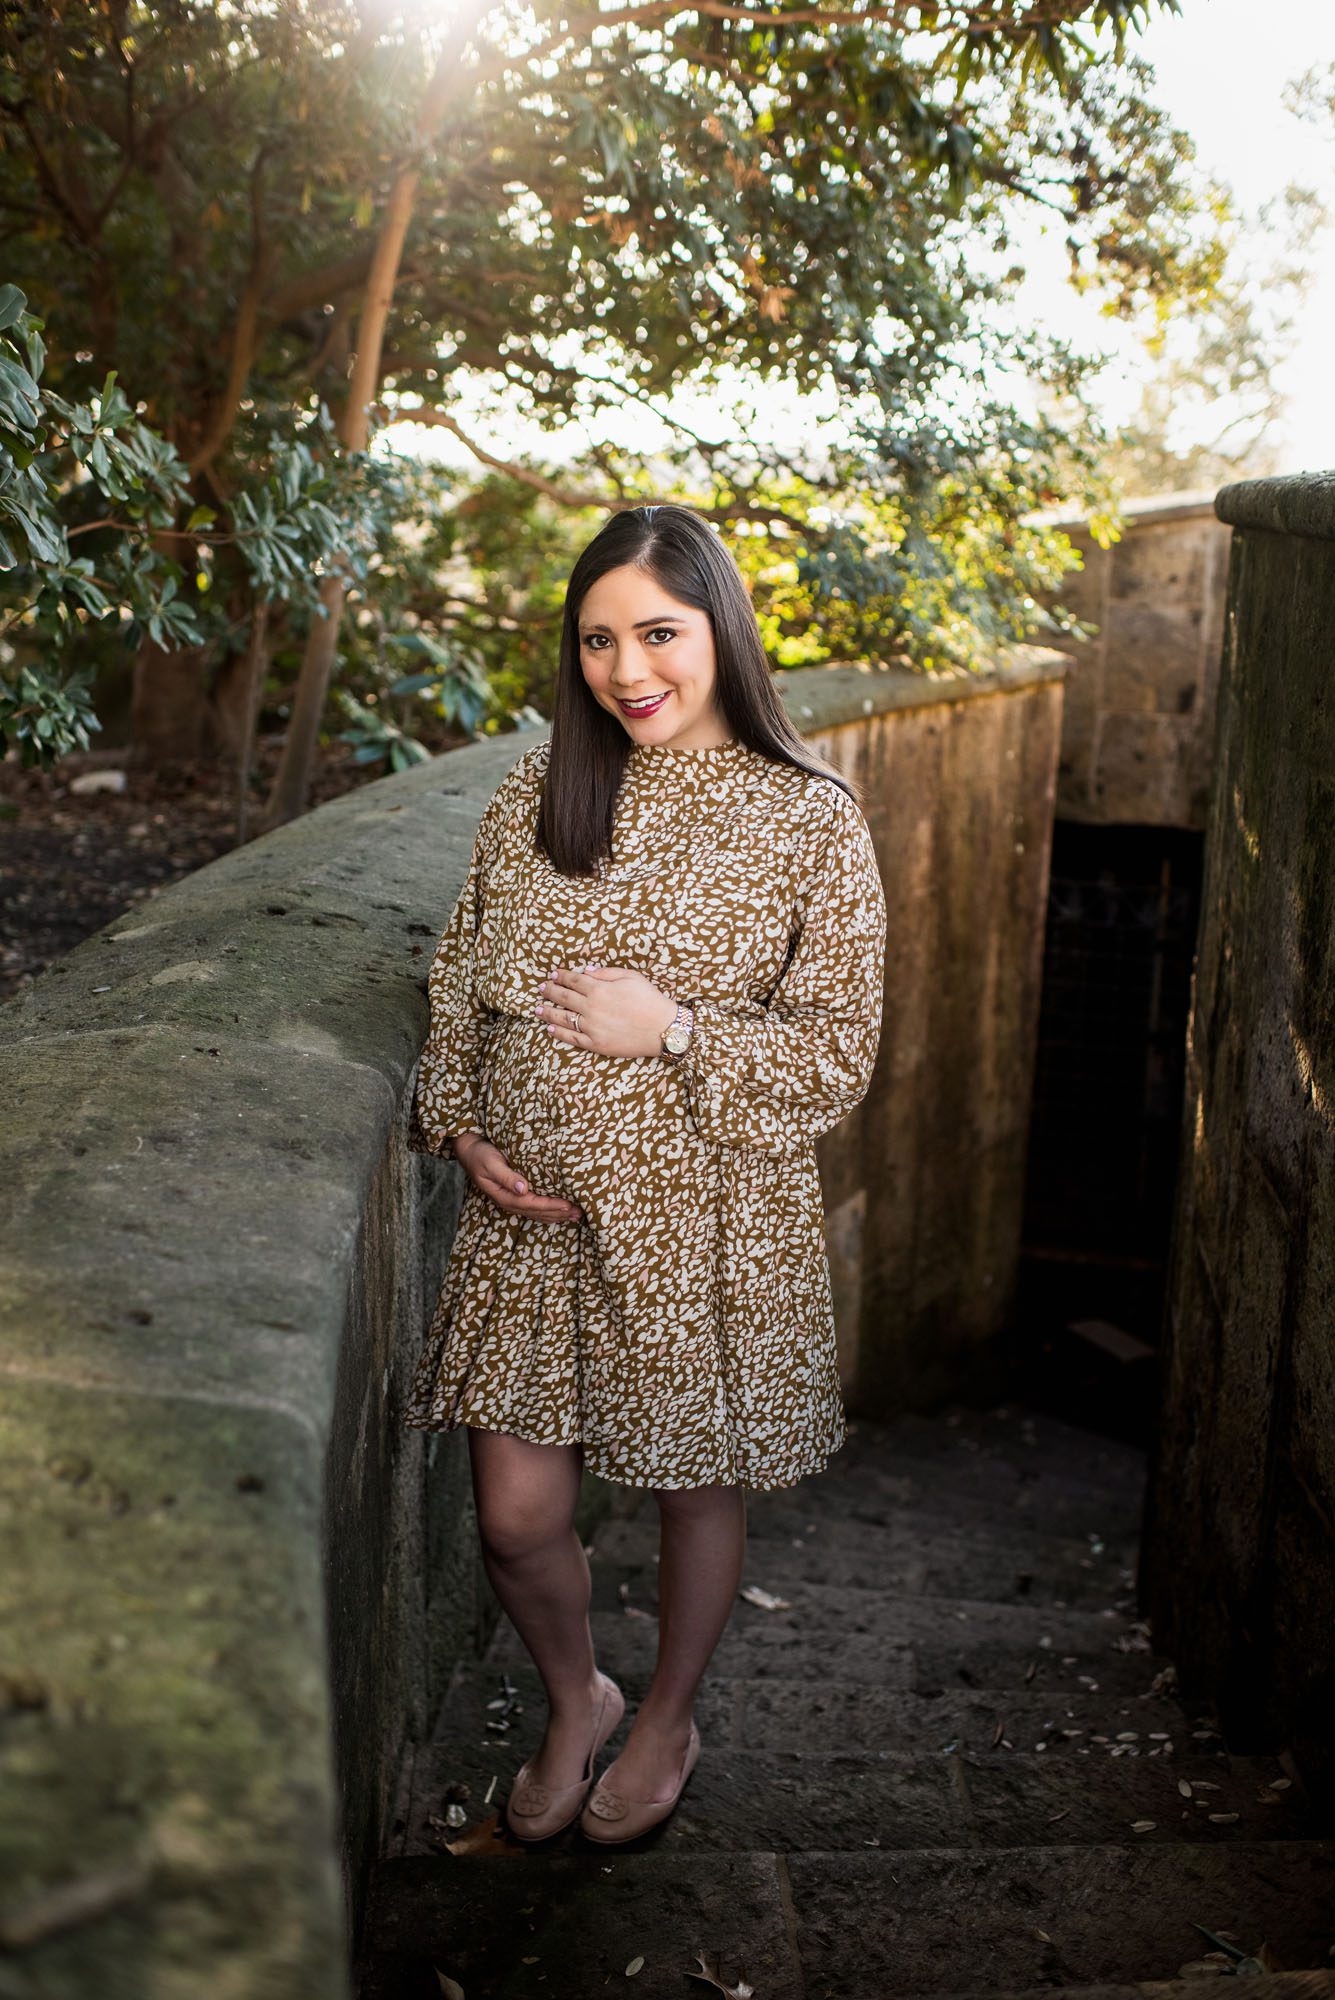 Pregnant mother standing in stairwell with sun streaming through the trees, Best San Antonio maternity photographer